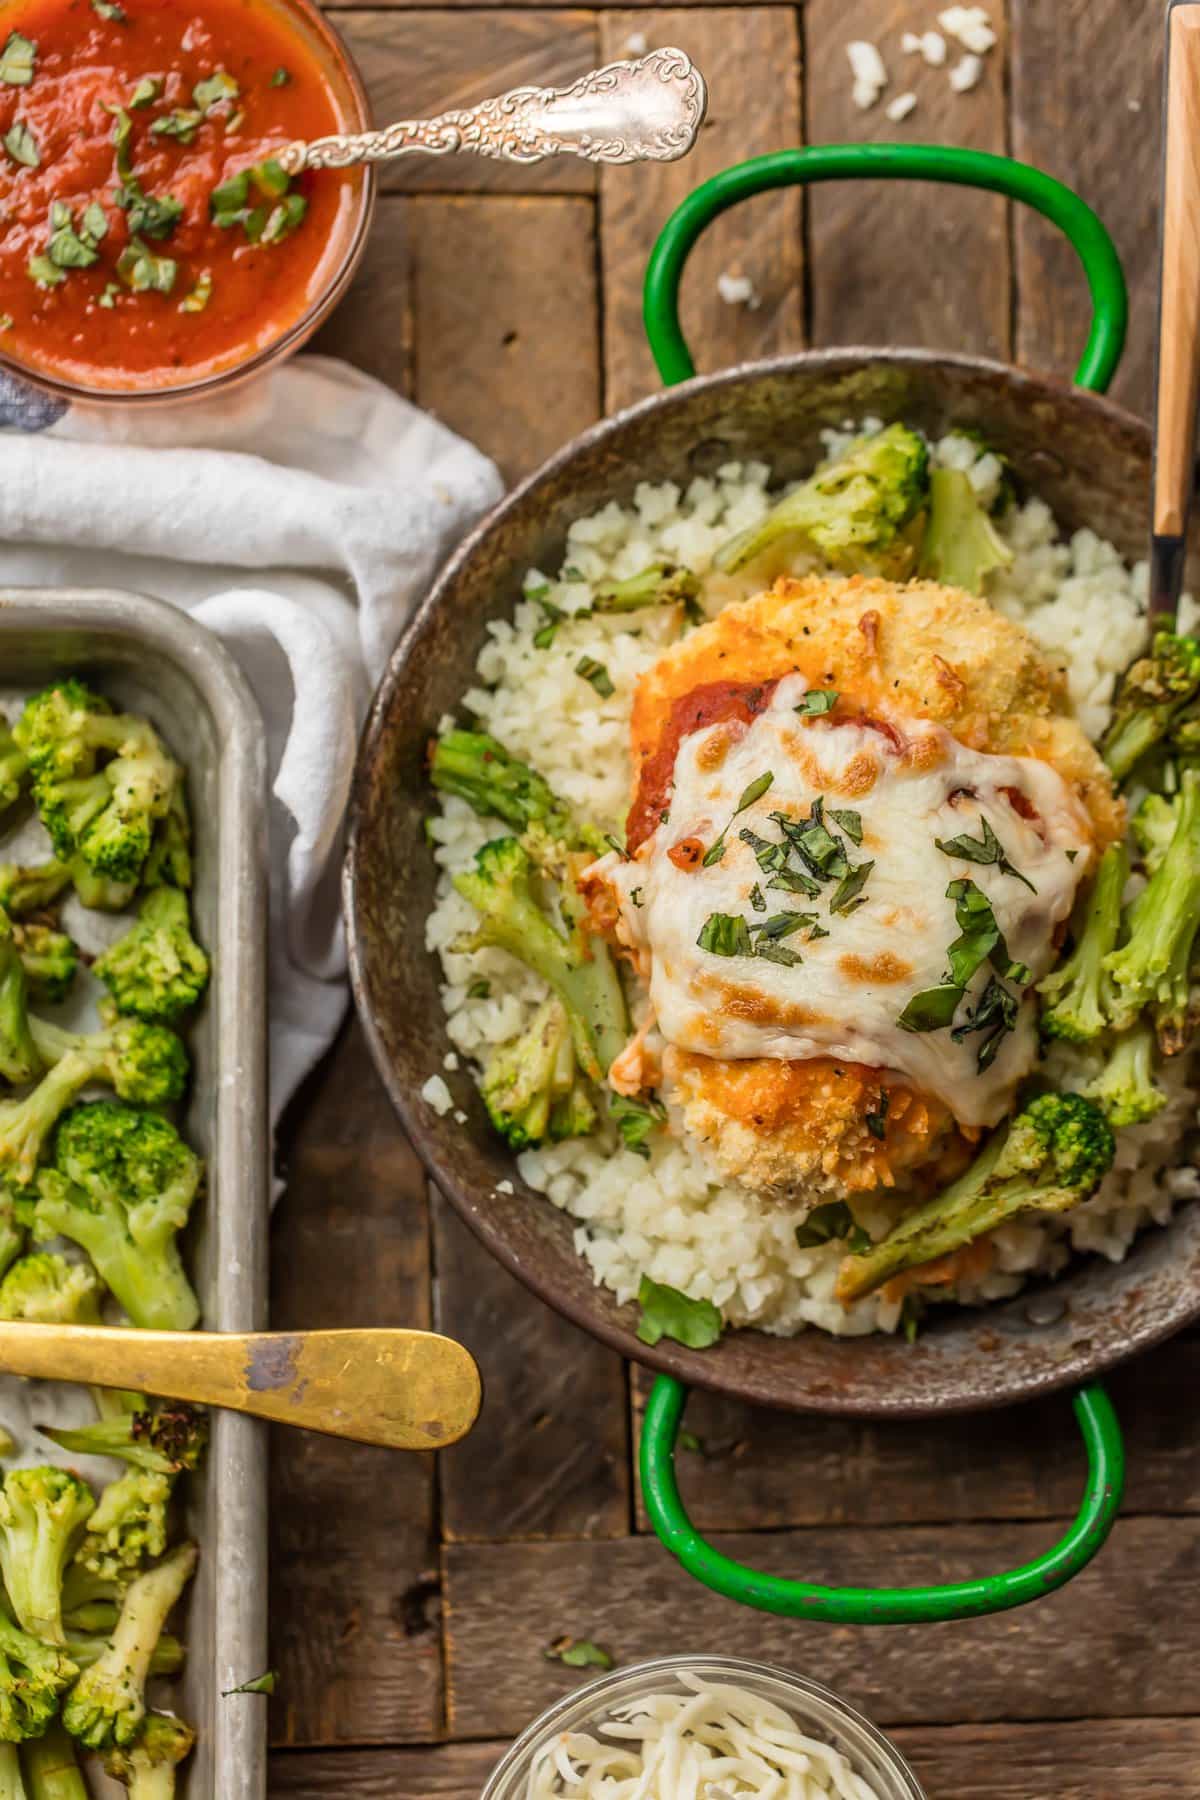 A bowl of riced cauliflower topped with baked chicken breast and broccoli